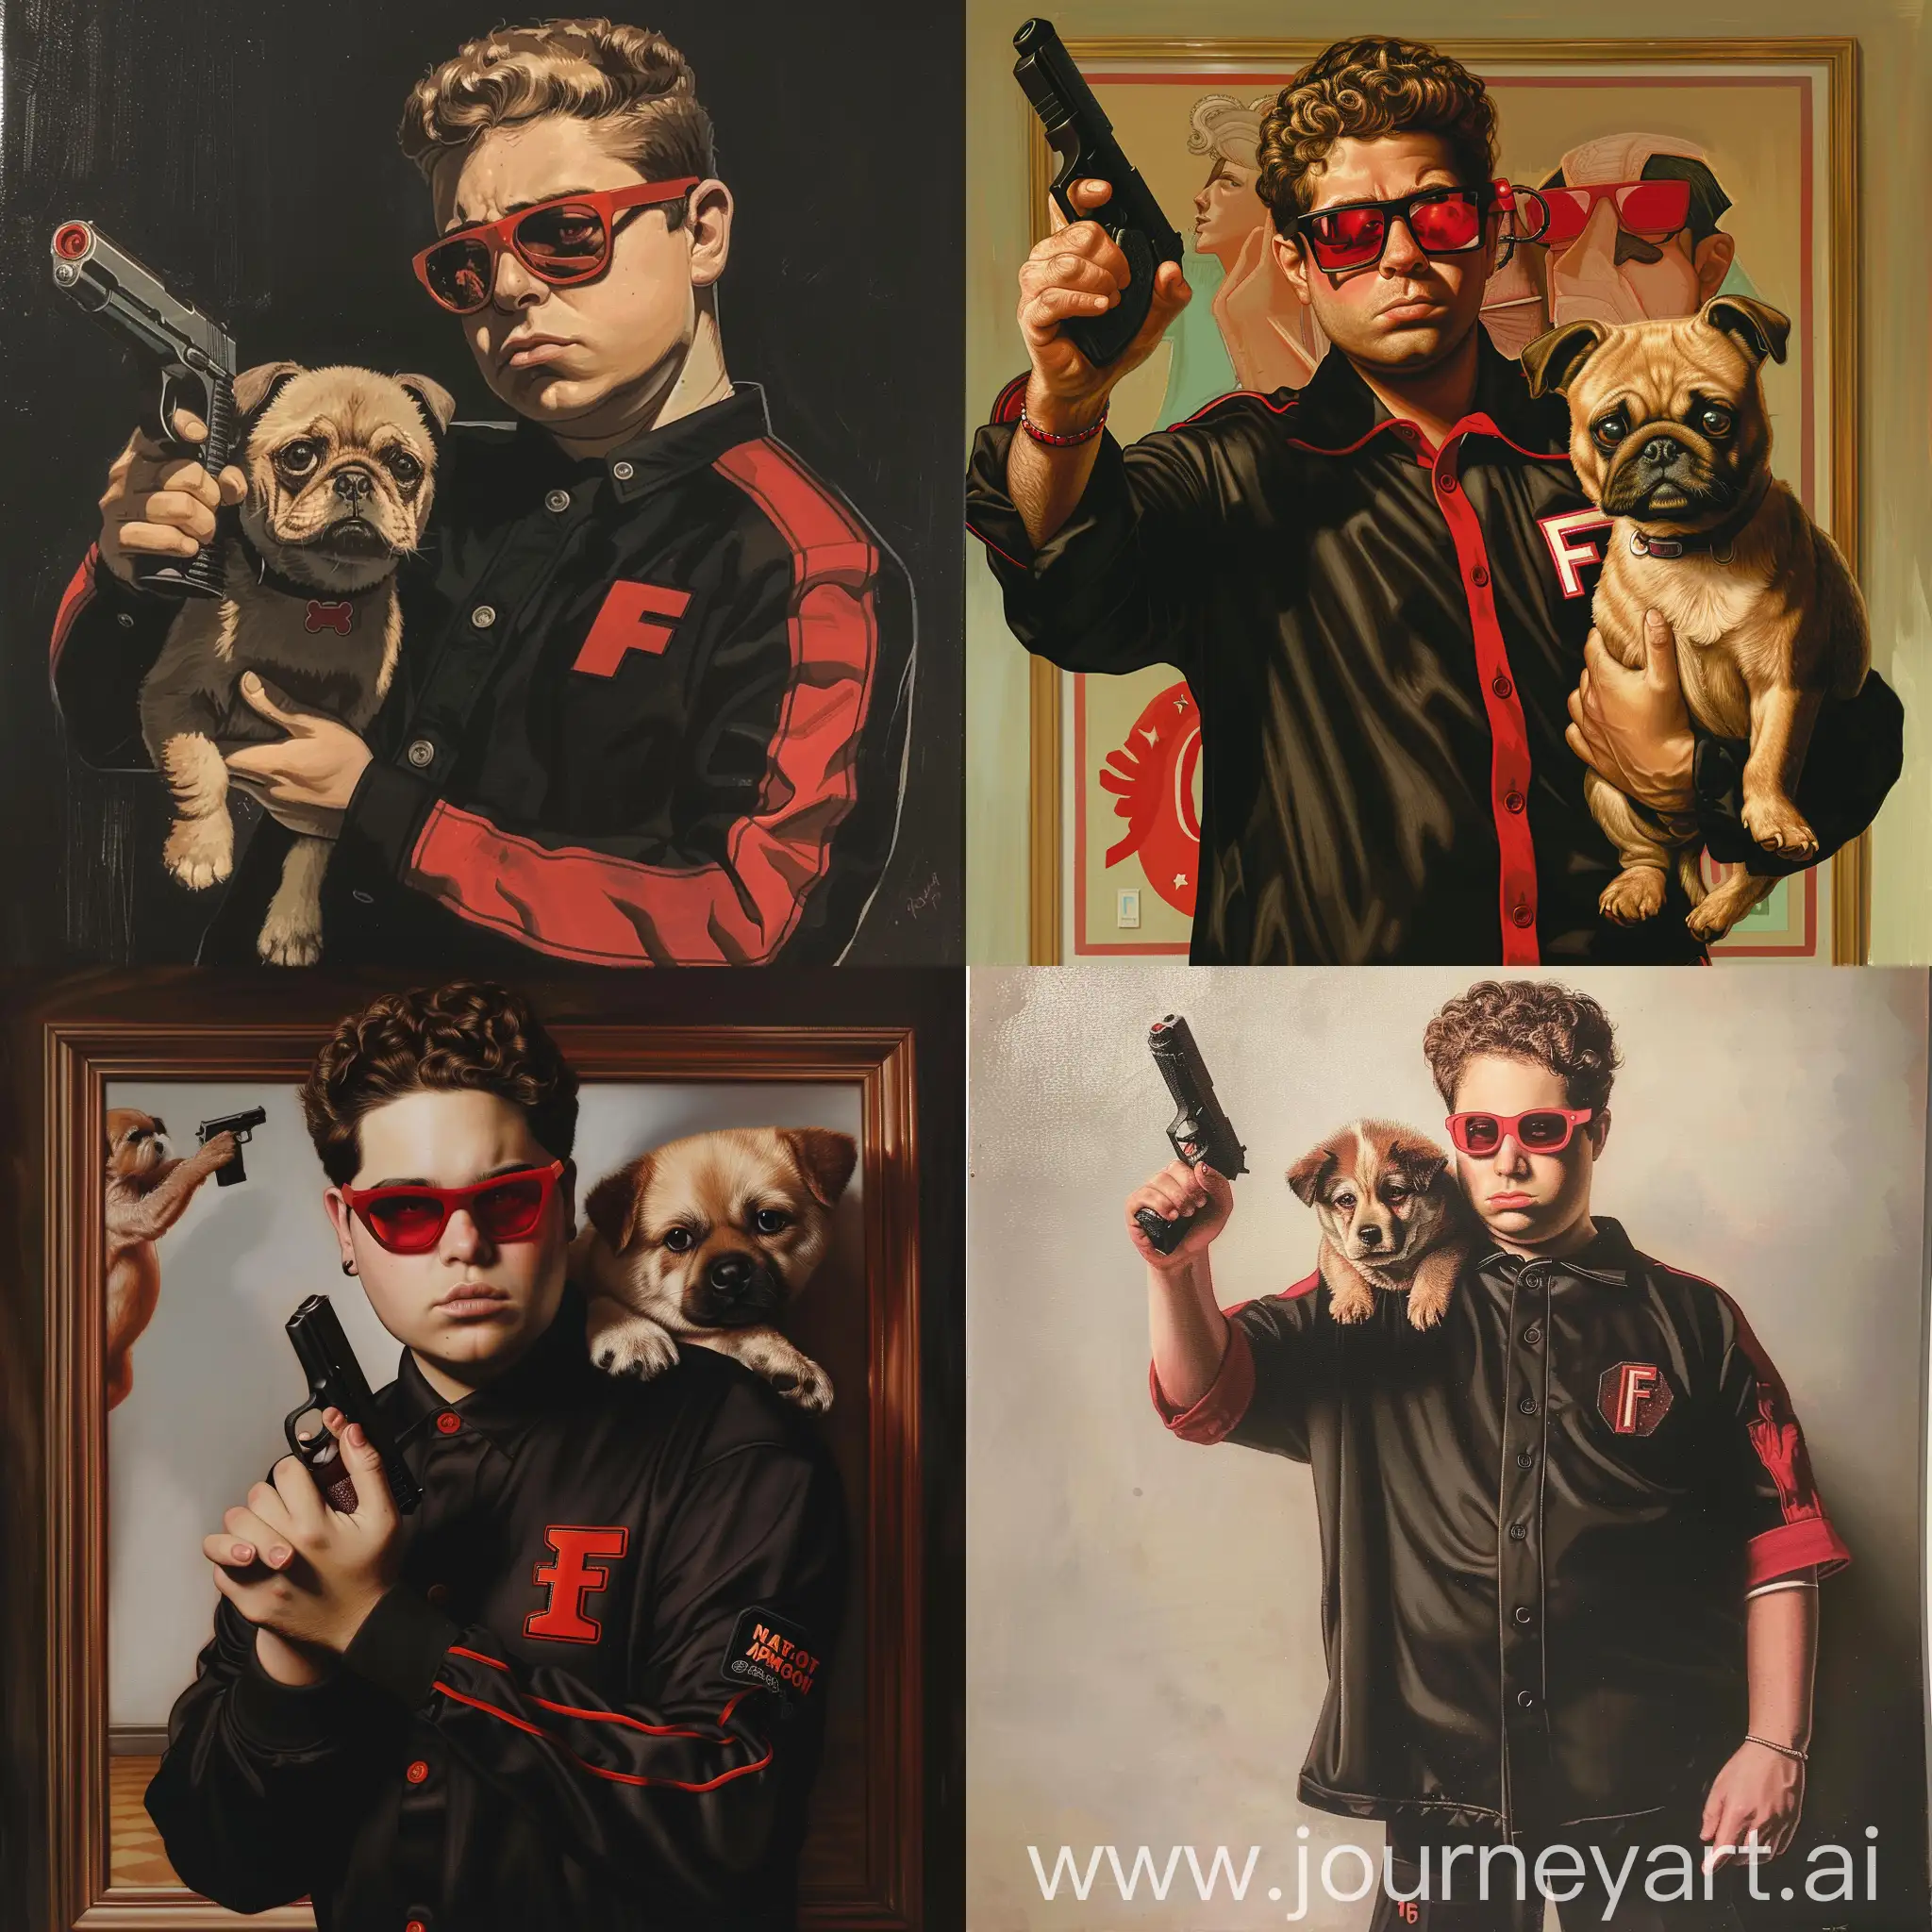 In the style of and looks just like the classic National Lampoon magazine cover with the man holding a gun to a sad puppy. the man is a chubby teenager who looks just like Actor Jonah Hill. he is wearing all black, a black button baseball shirt with red trim and a red F on the left chest, red tinted sunglasses. He is holding a gun to a sad puppy's head. no text